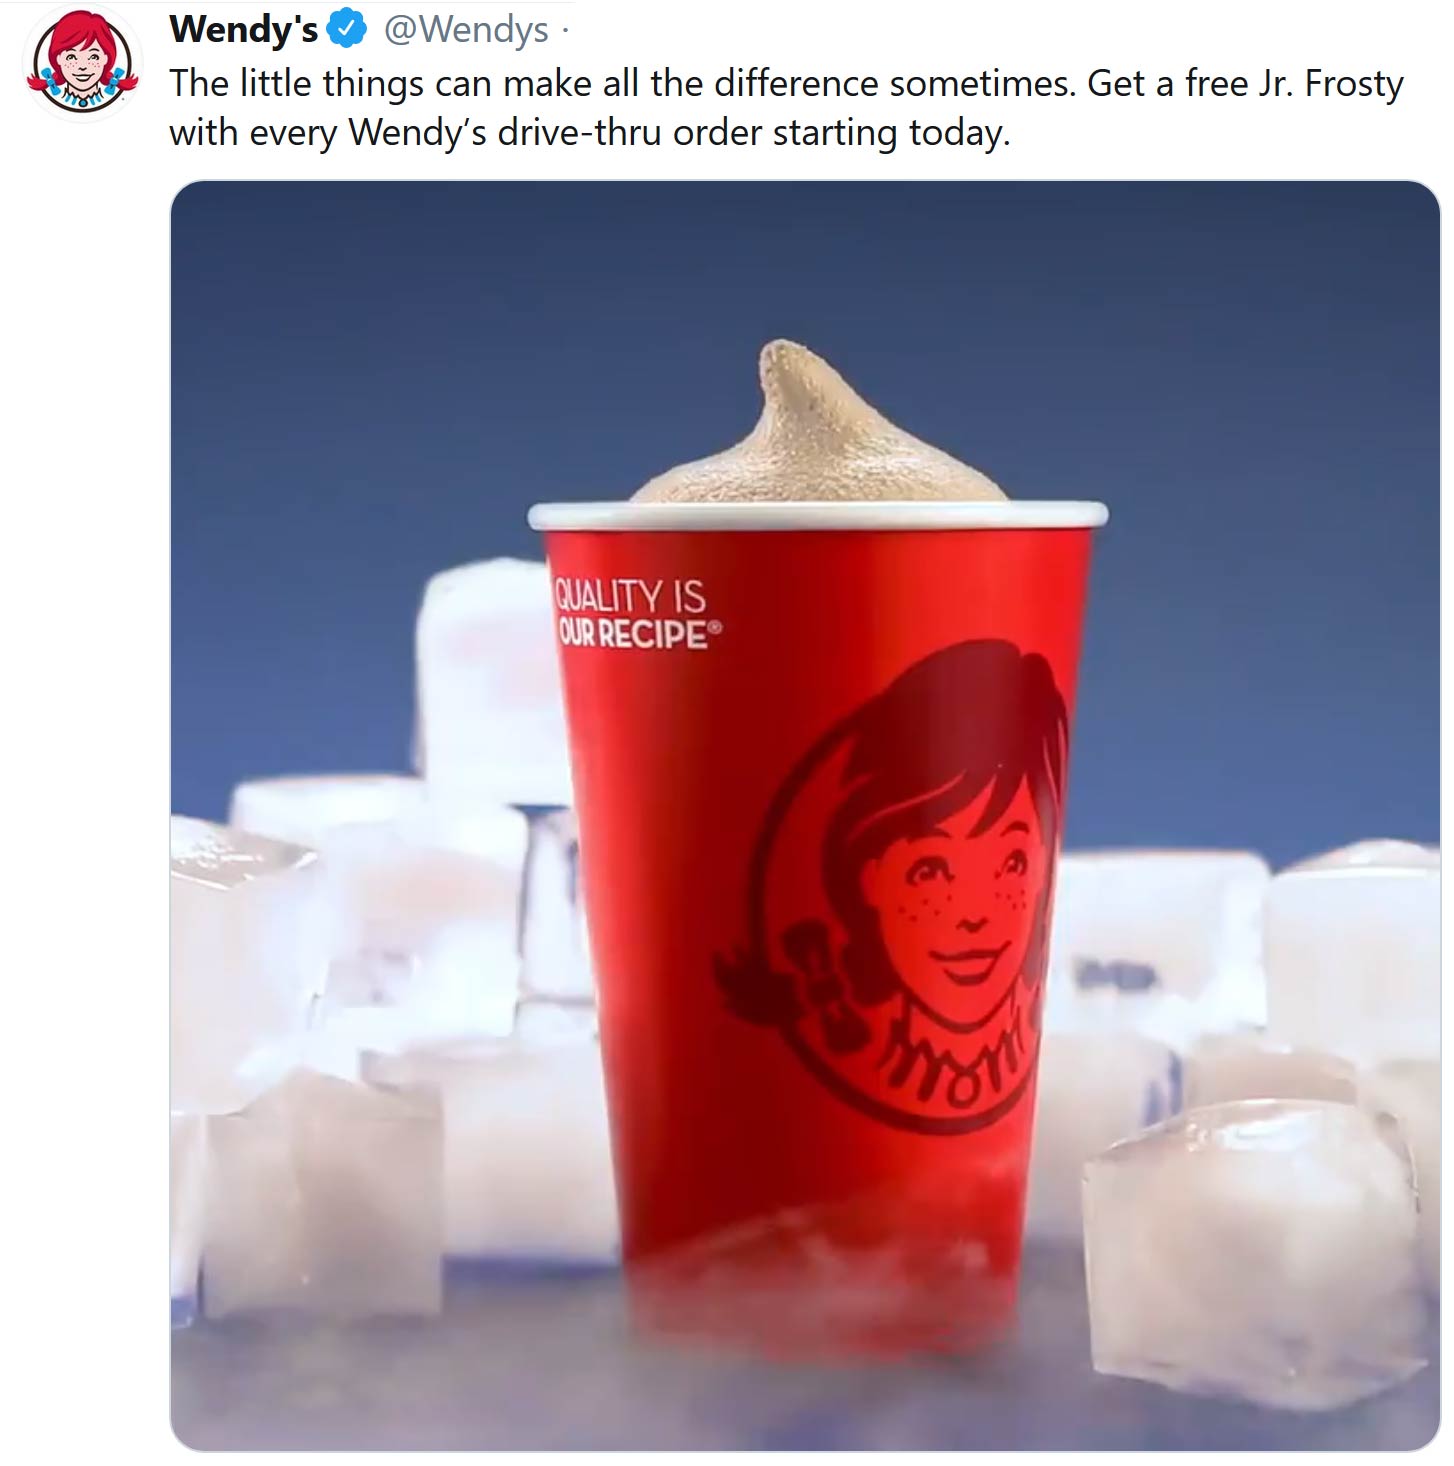 Wendys coupons & promo code for [May 2022]